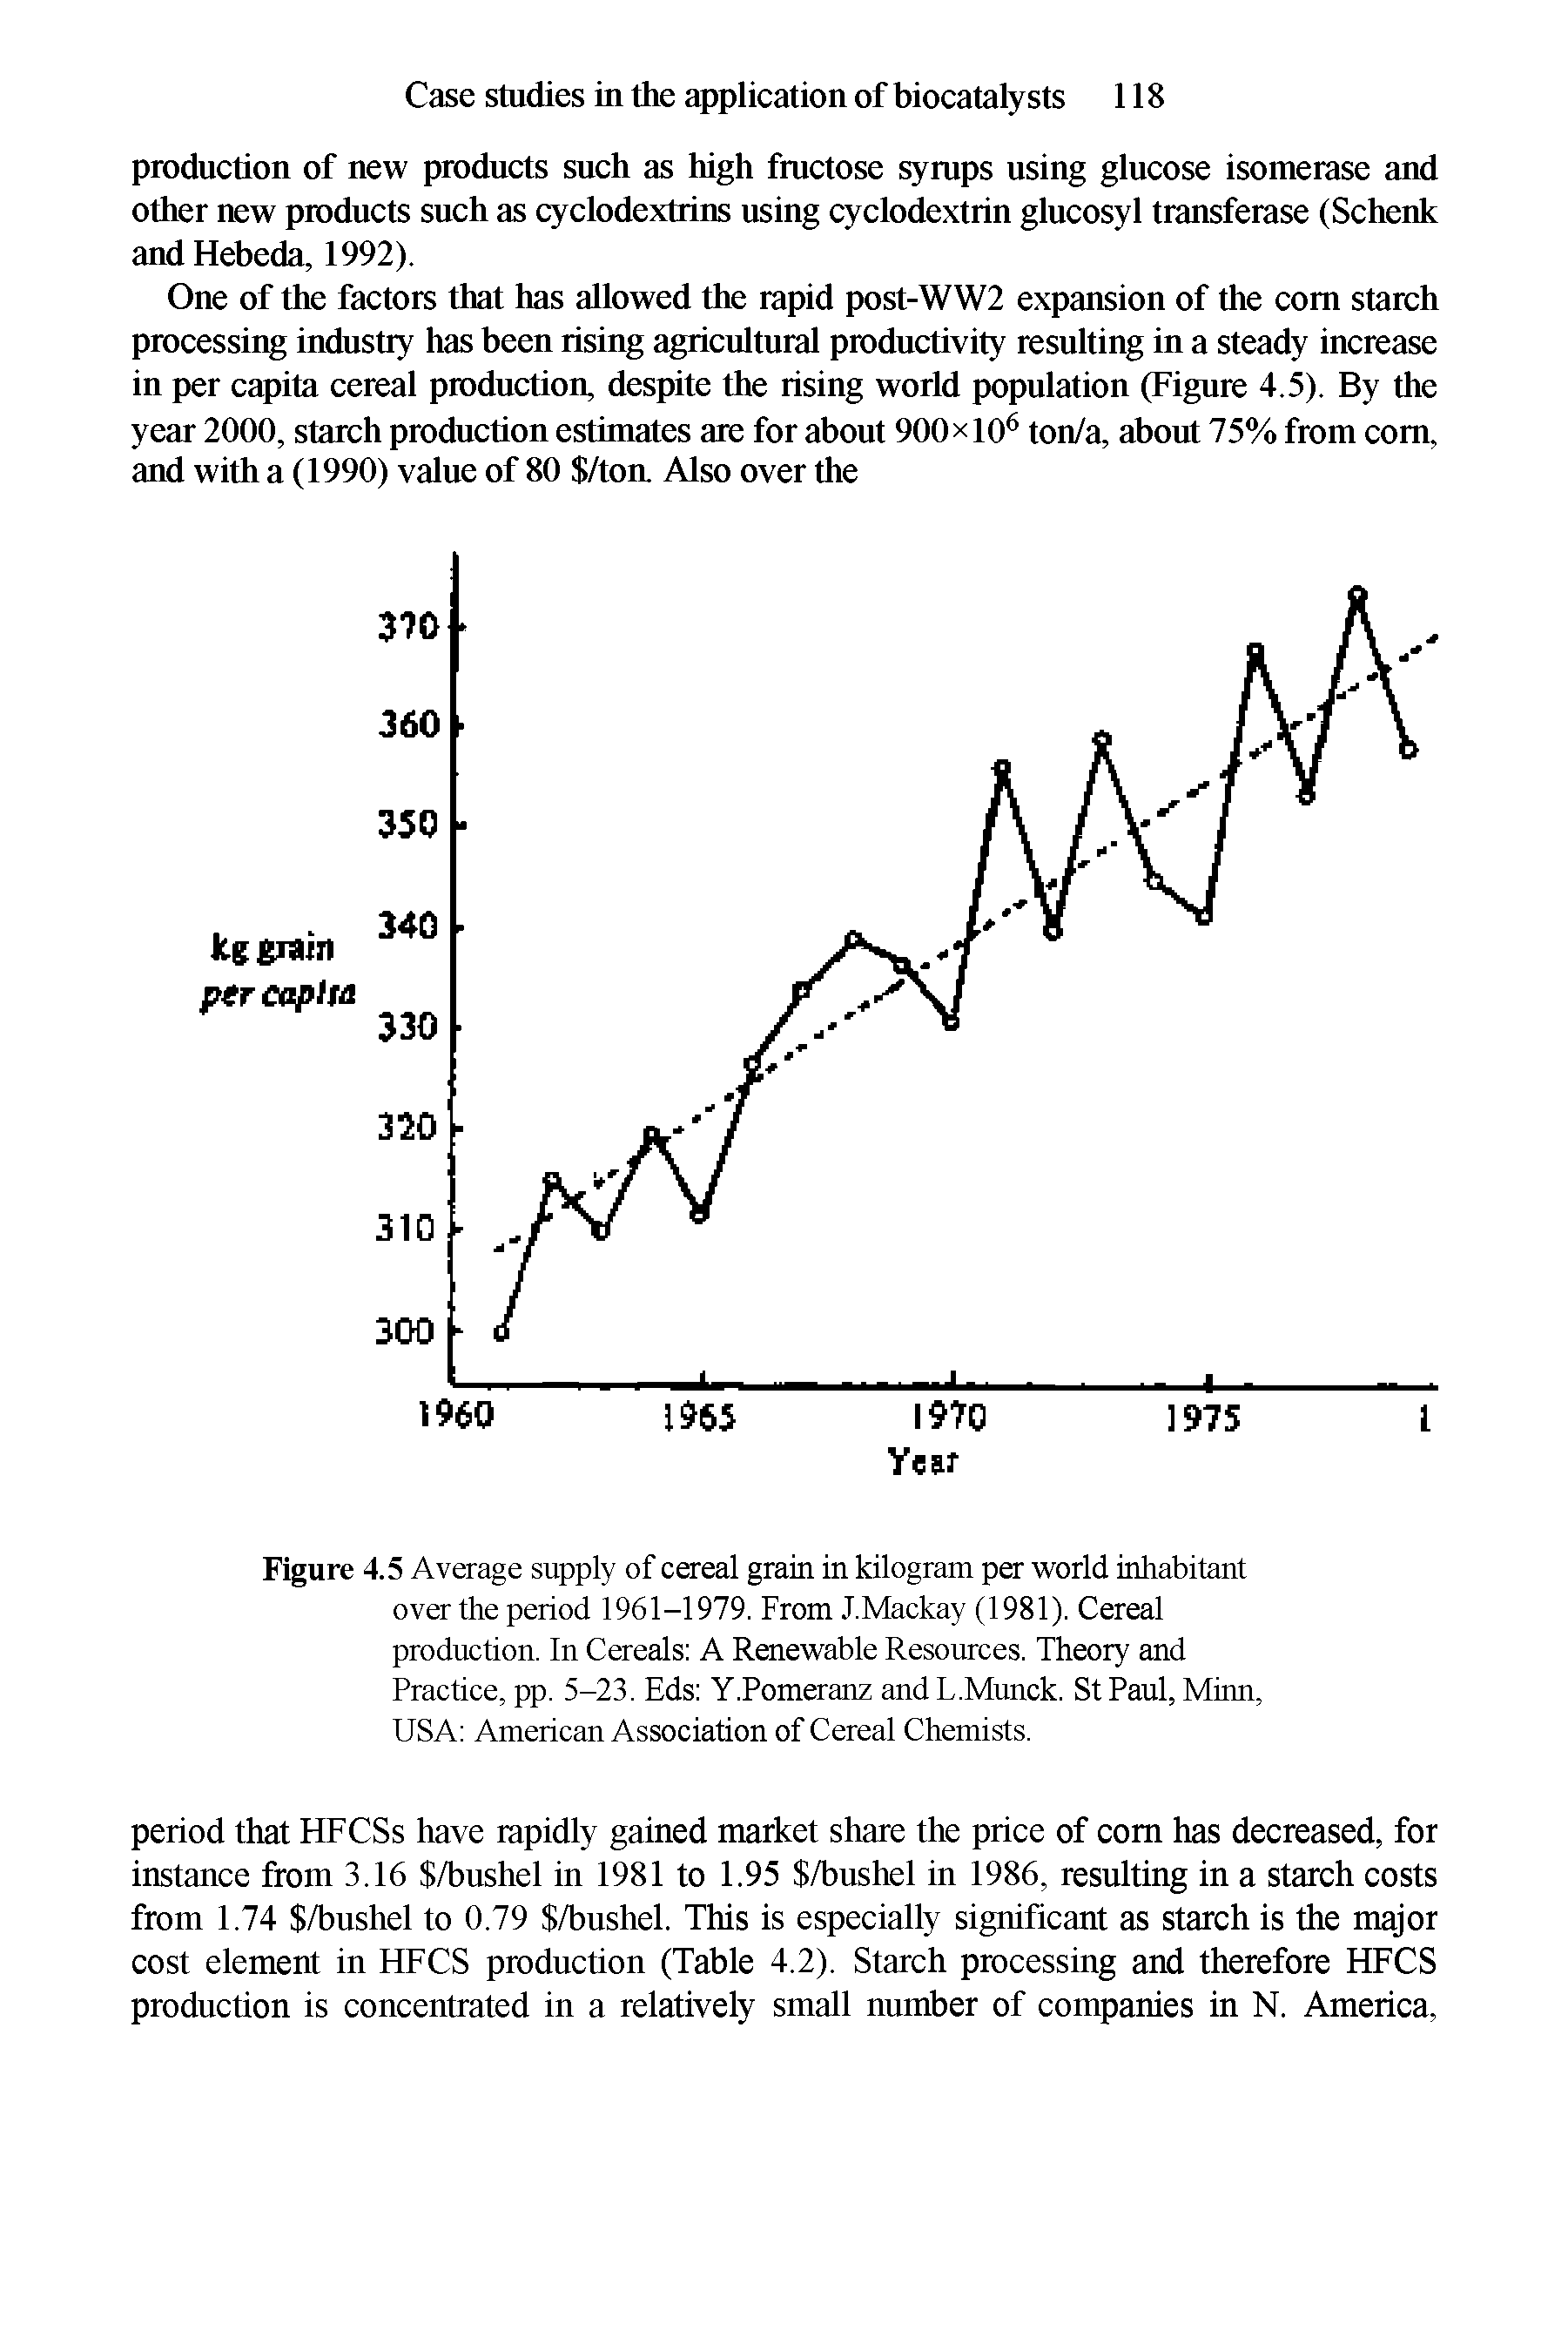 Figure 4.5 Average supply of cereal grain in kilogram per world inhabitant over the period 1961-1979. From J.Mackay (1981). Cereal production. In Cereals A Renewable Resources. Theory and Practice, pp. 5-23. Eds Y.Pomeranz and L.Munck. St Paul, Minn, USA American Association of Cereal Chemists.